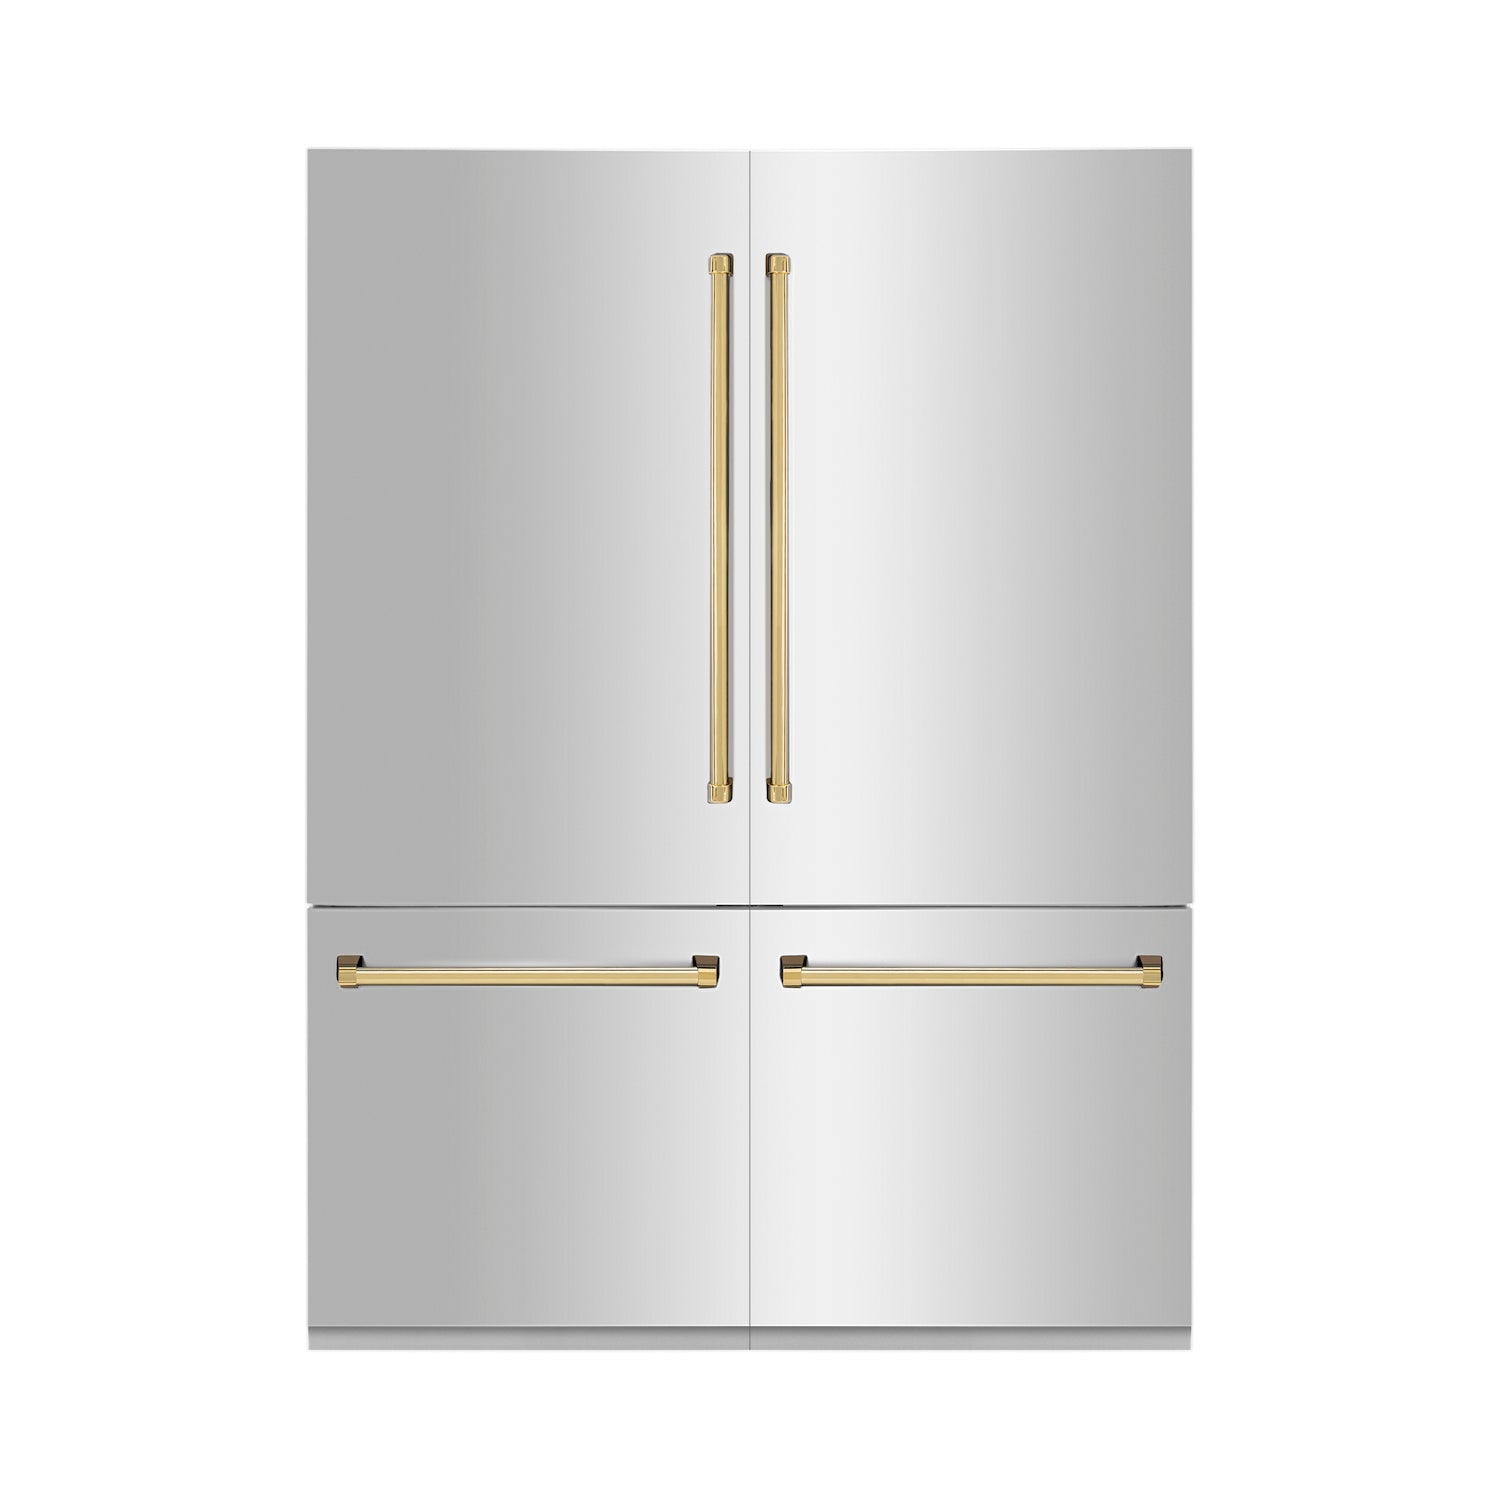 ZLINE Autograph Edition 60 in. 32.2 cu. ft. Built-in 4-Door French Door Refrigerator with Internal Water and Ice Dispenser in Stainless Steel with Polished Gold Accents (RBIVZ-304-60-G)